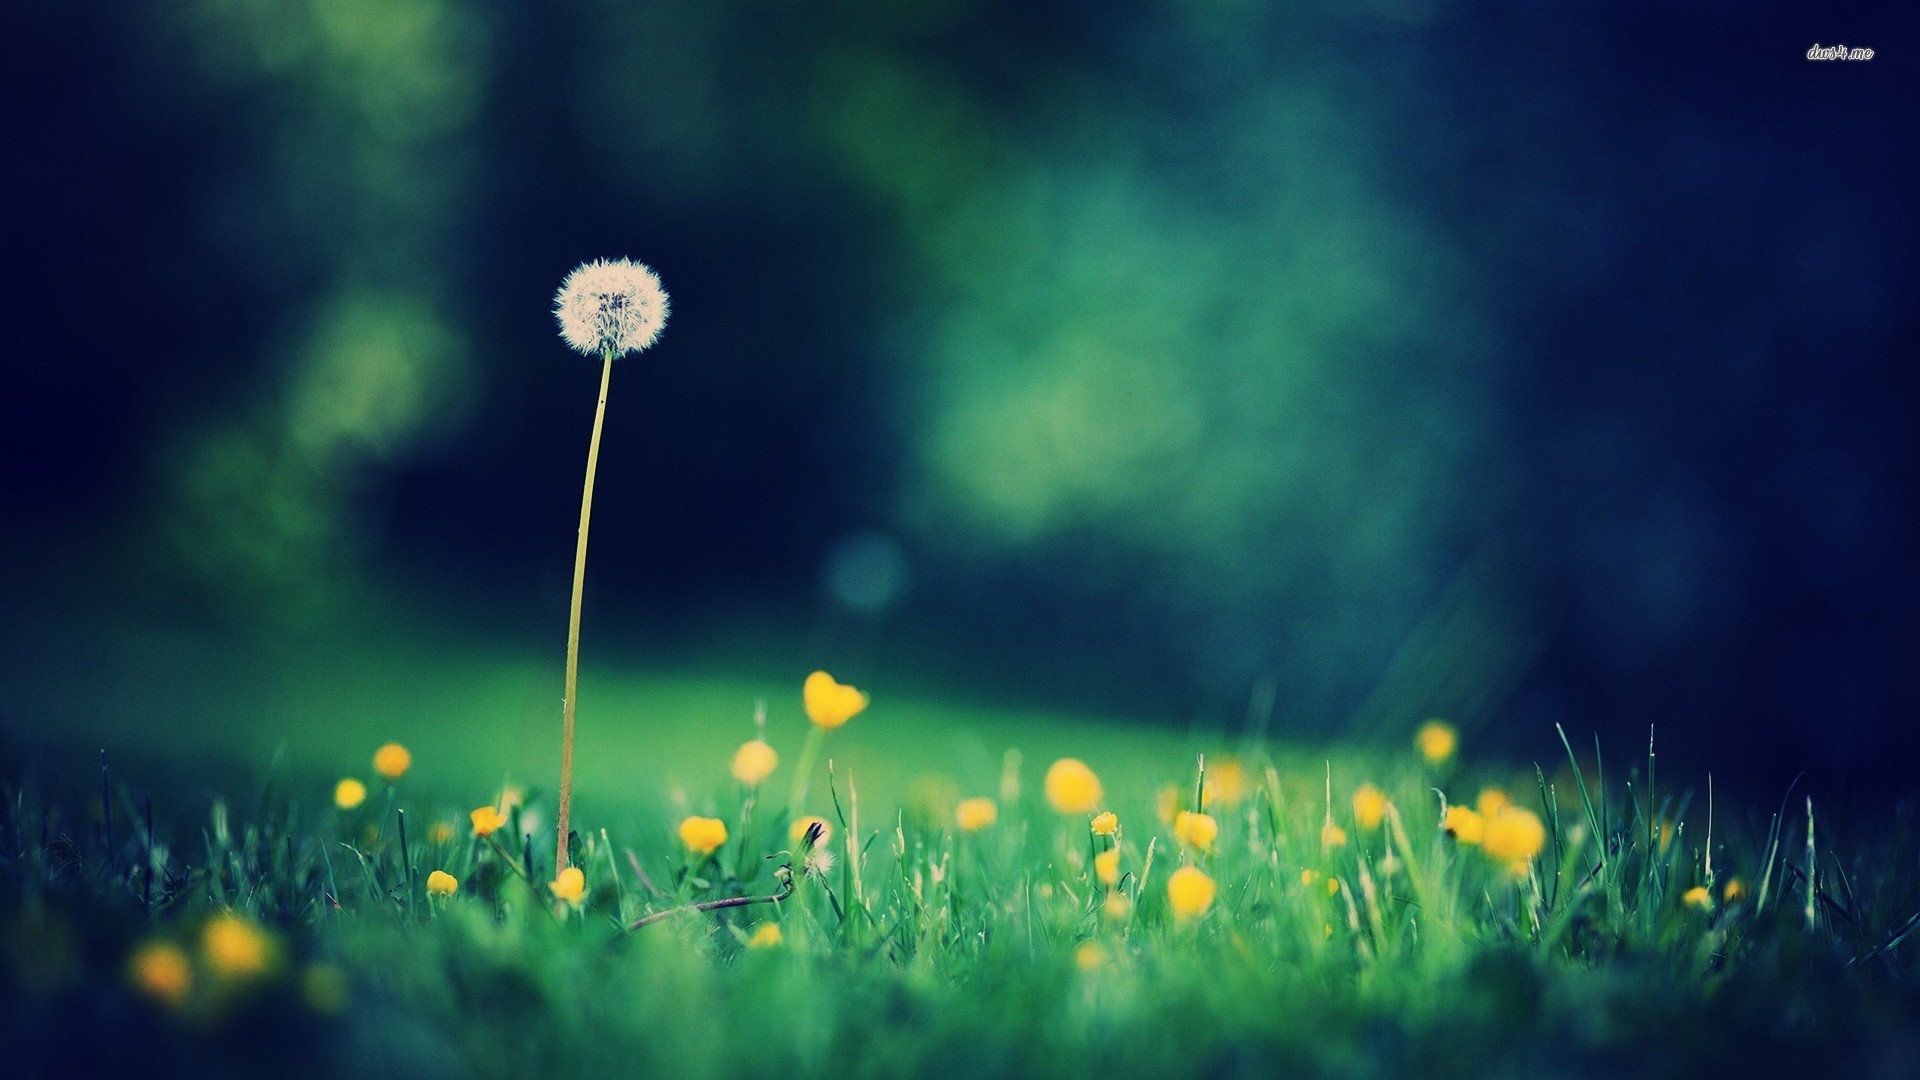 Dandelion Latest Wallpapers - Editing Natural Wallpapers Nature Background  - 1920x1080 Wallpaper 